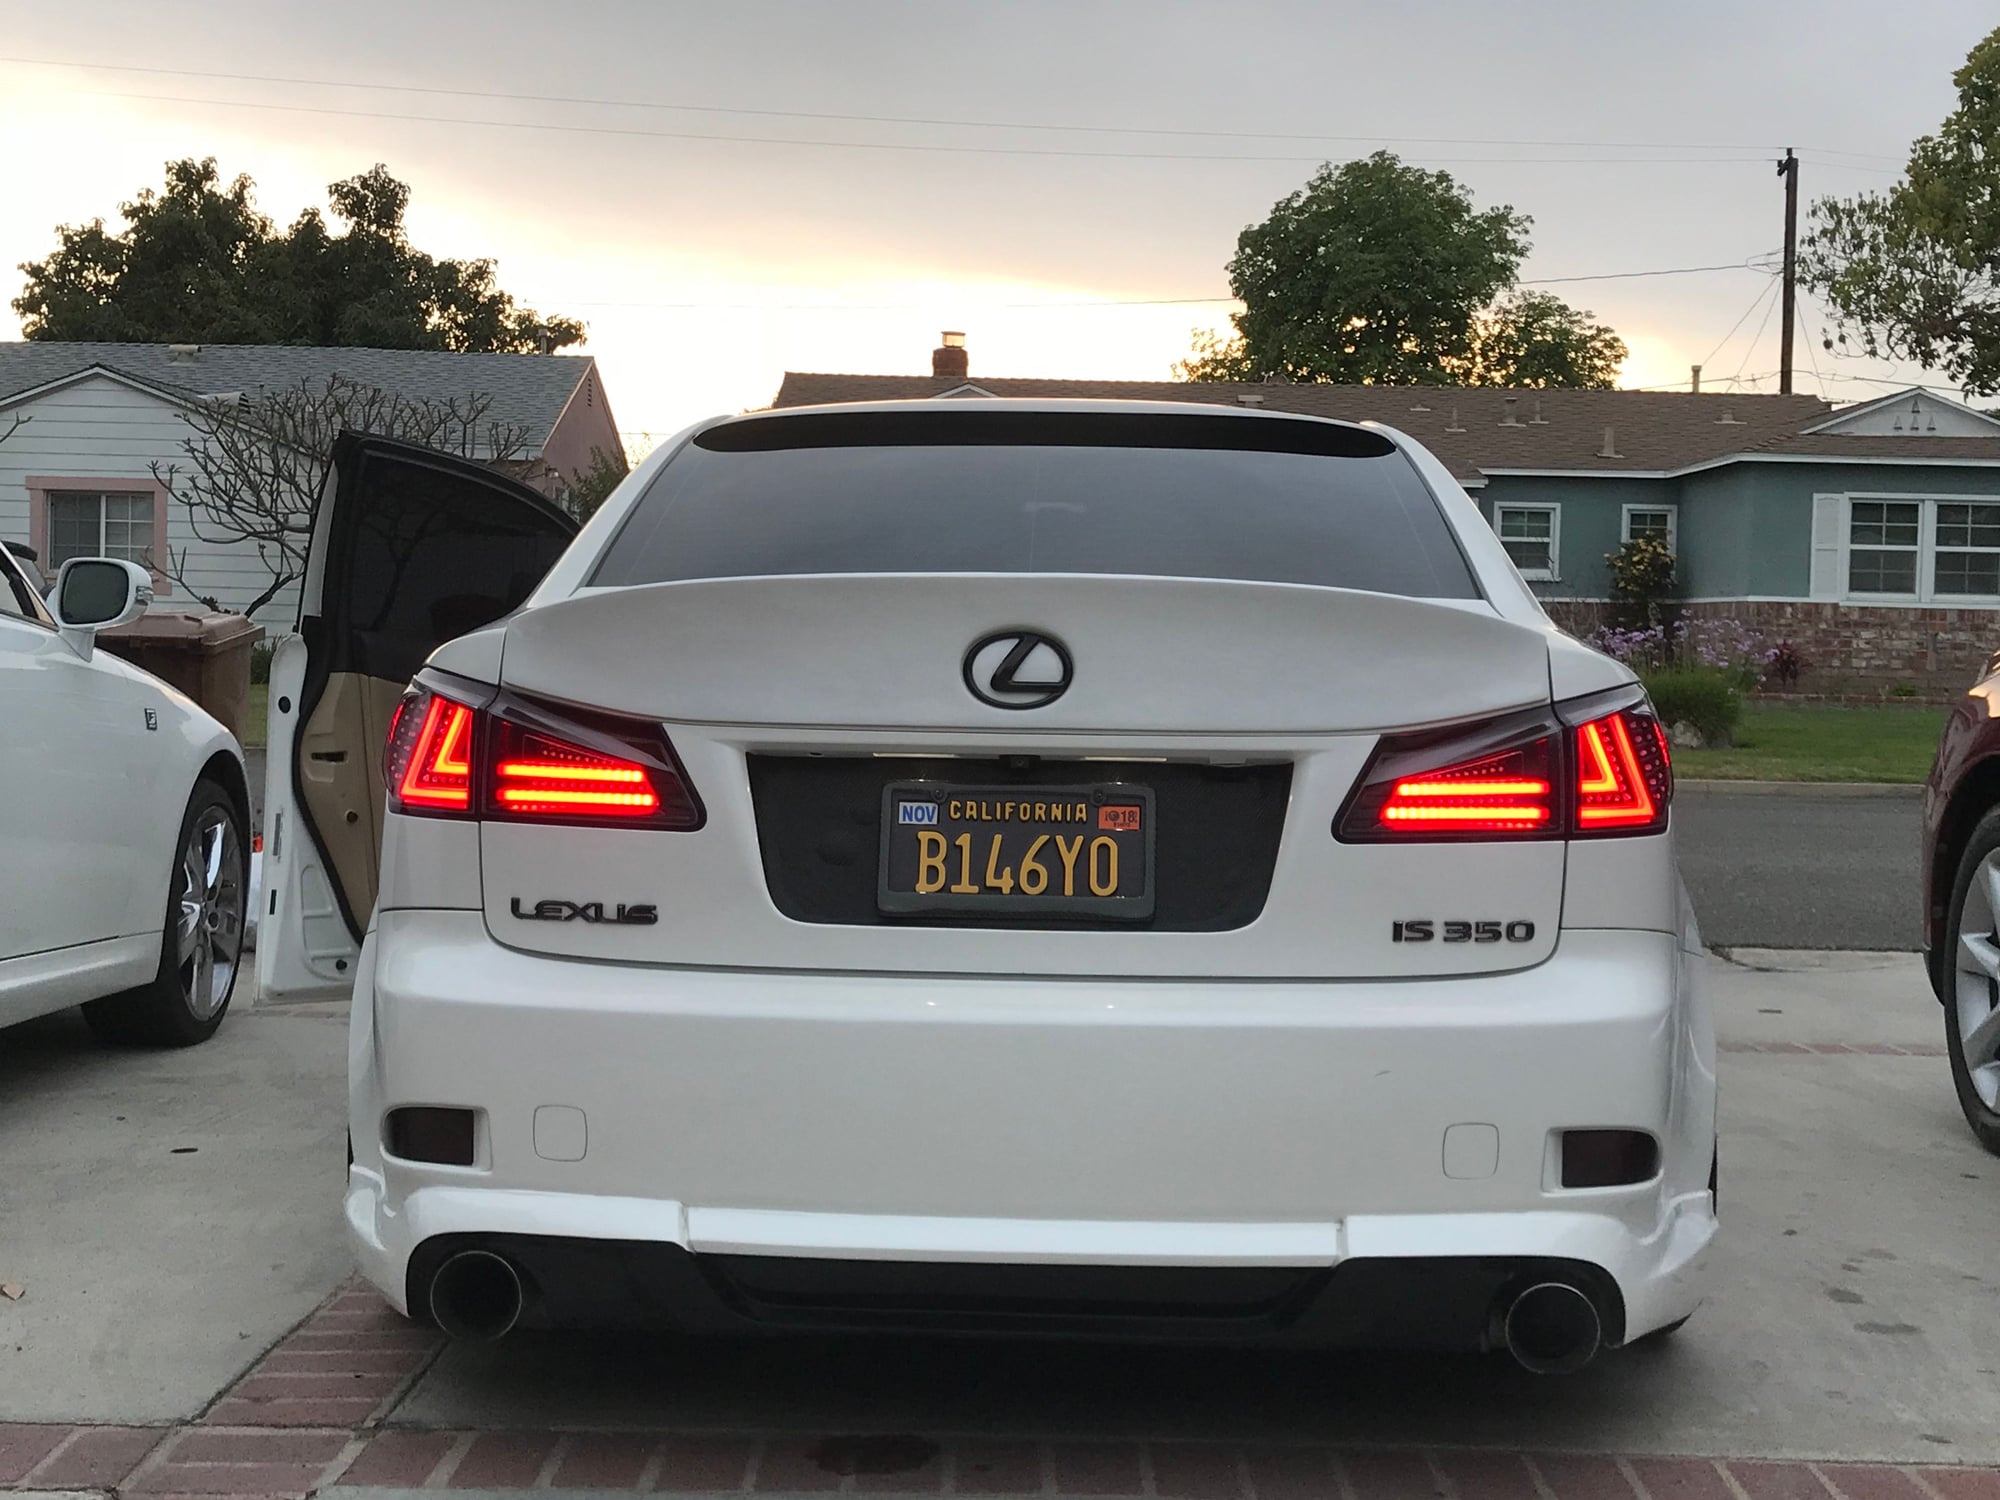 Lights - BNIB IS250/350/IS-F Black housing with clear lenses Spec-D Taillight - New - 2006 to 2008 Lexus IS350 - 2006 to 2008 Lexus IS F - 2006 to 2008 Lexus IS250 - Garden Grove, CA 92840, United States